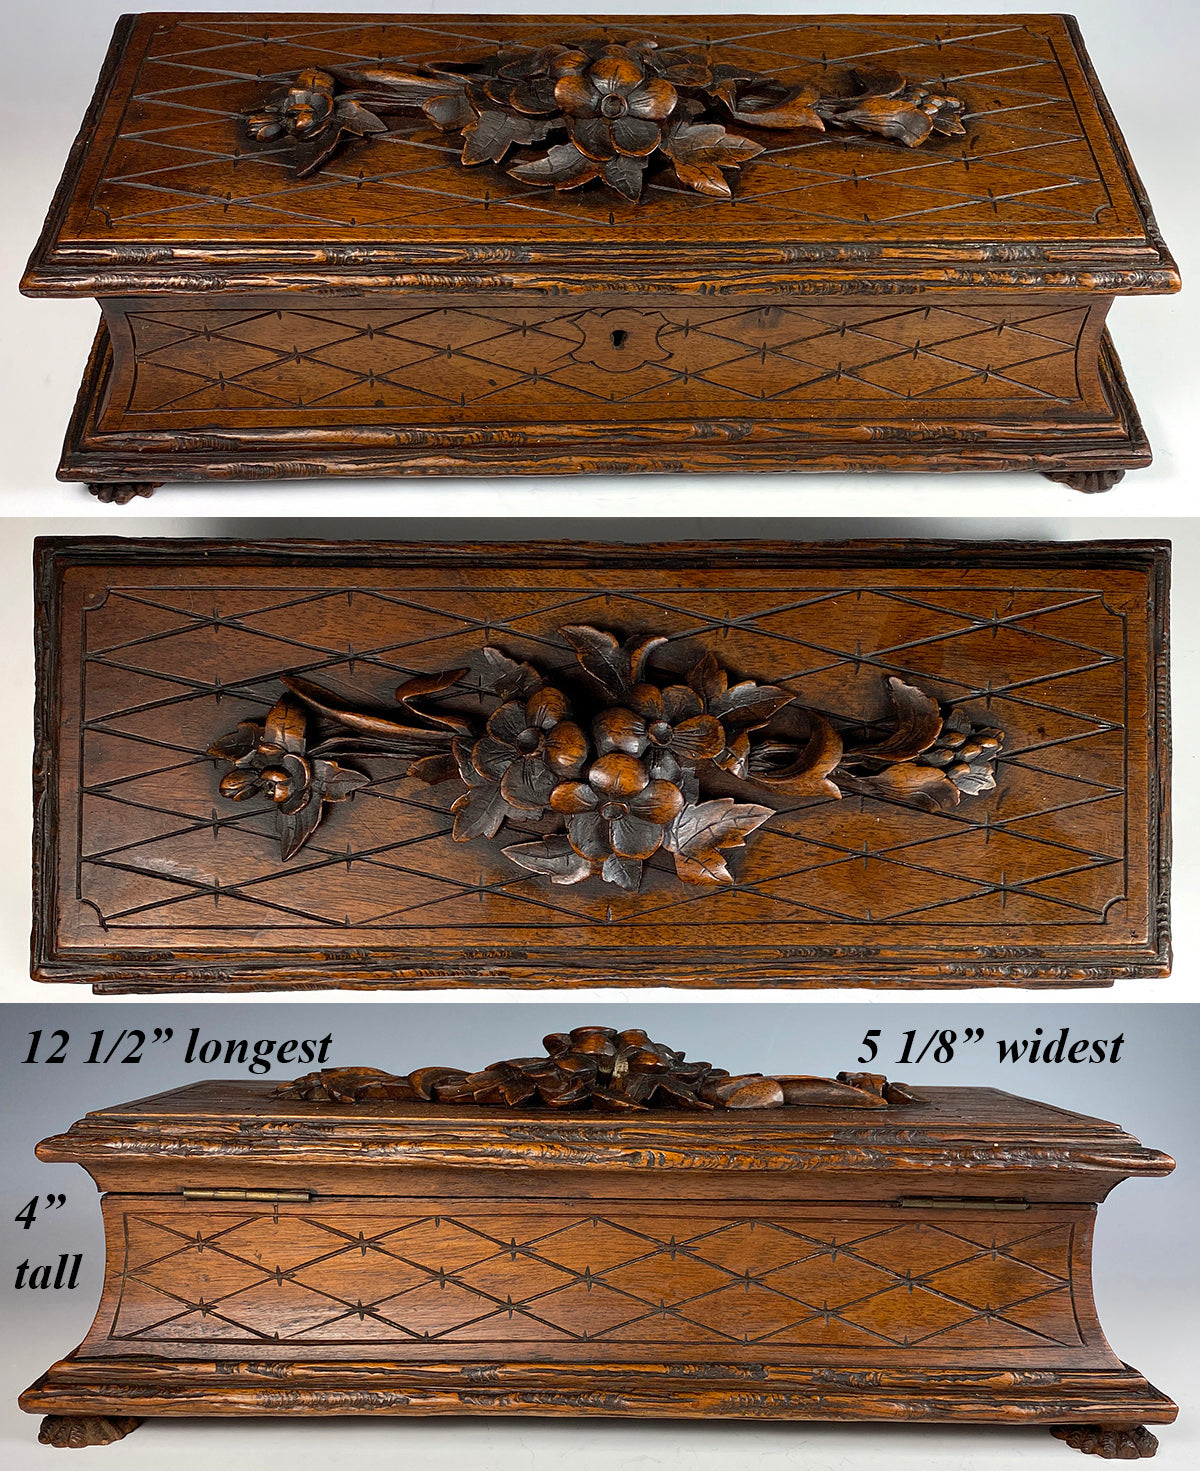 Antique Hand Carved Black Forest 12.5" Long Glove or Jewelry Box, Casket, Flowers